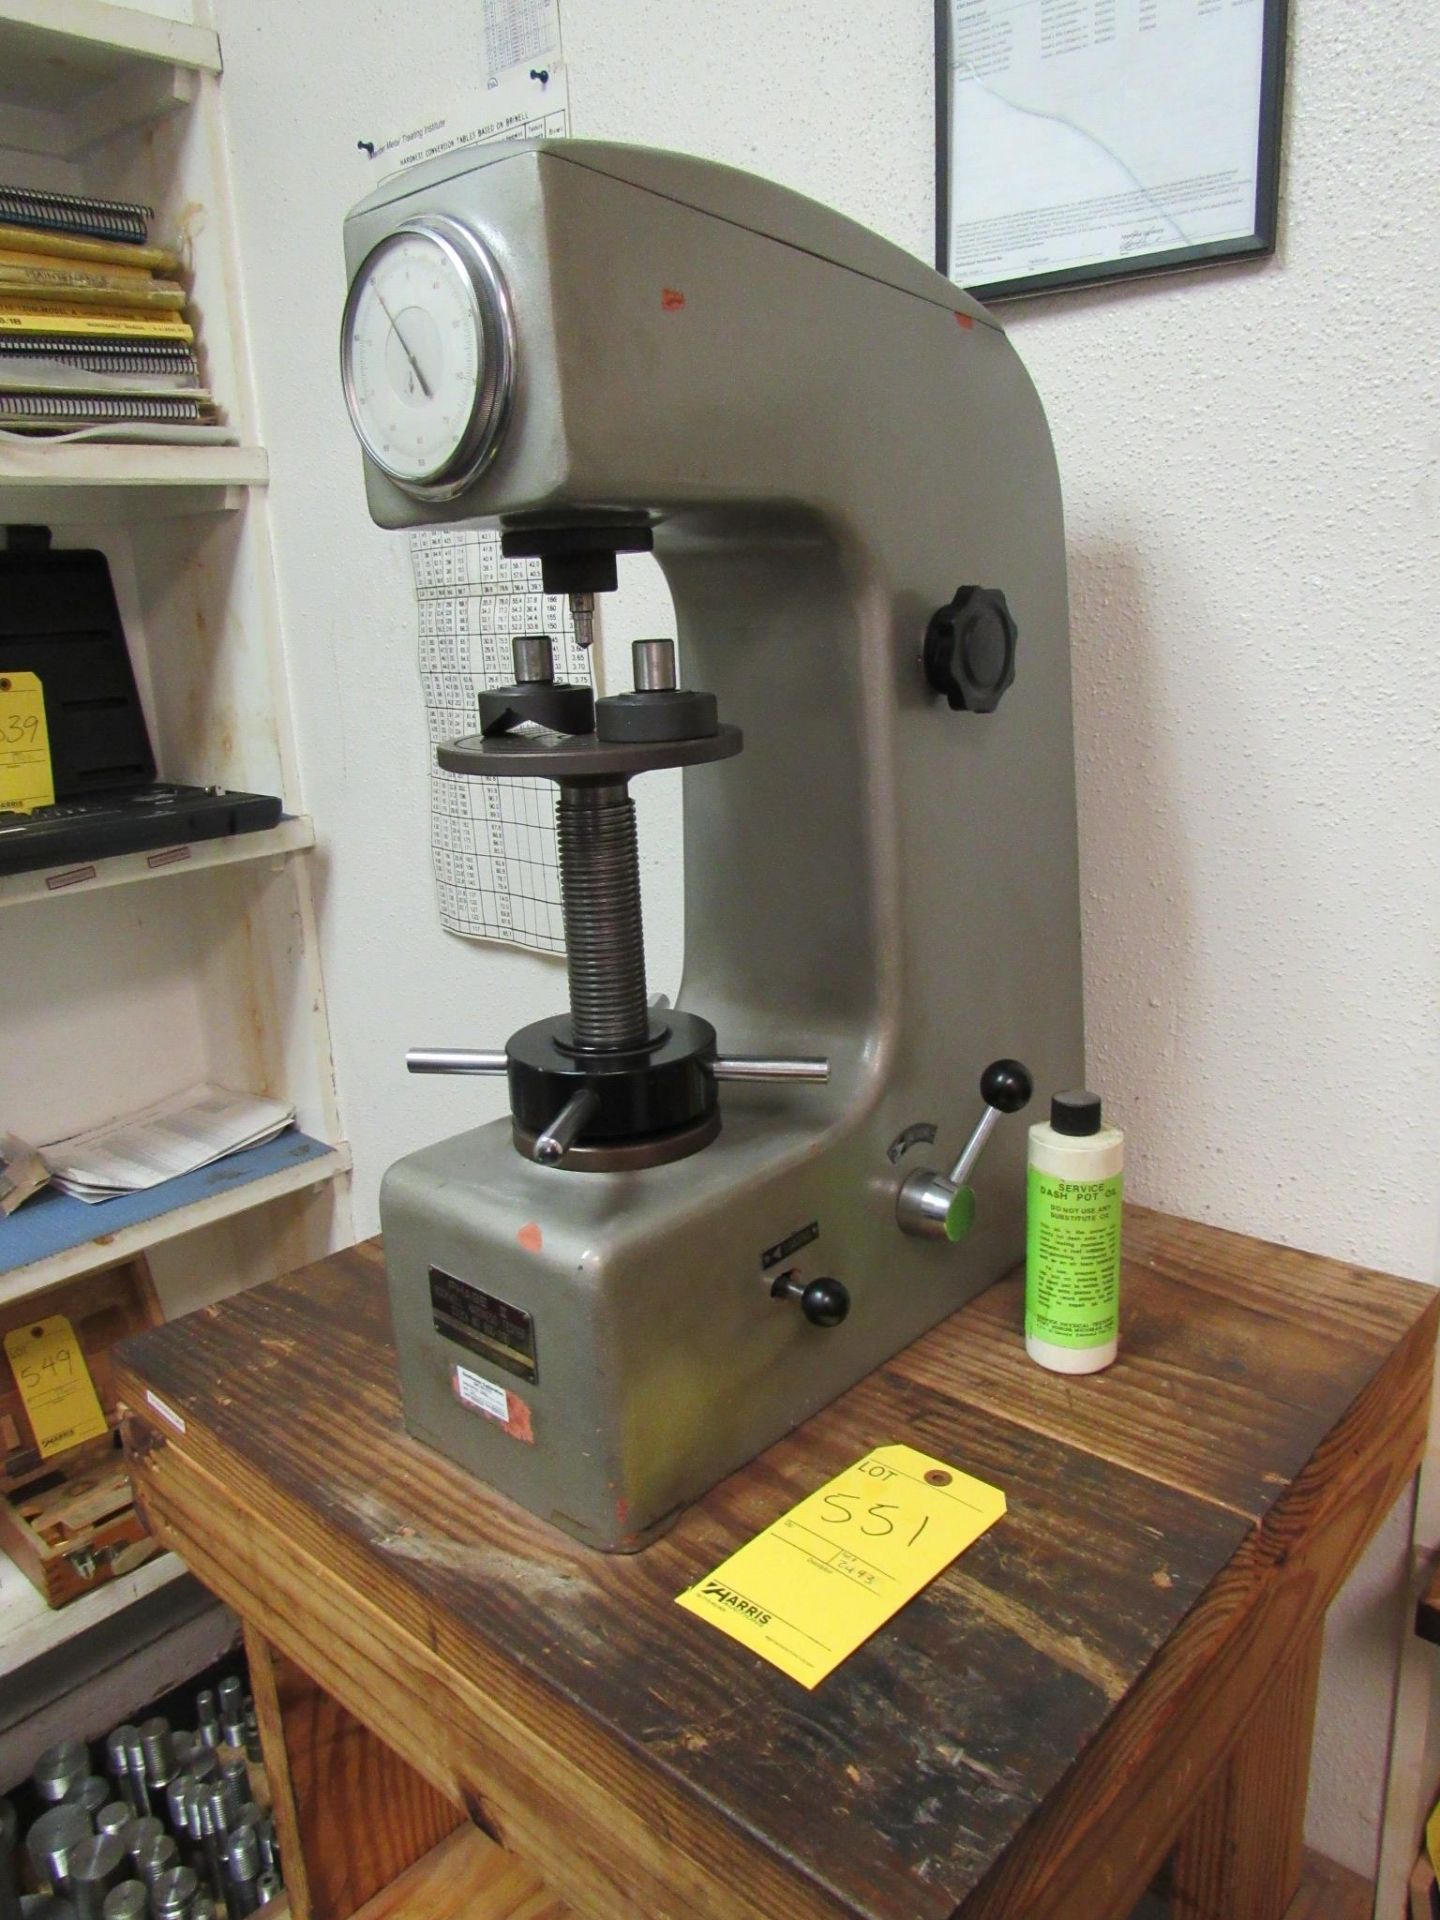 PHASE II ROCKWELL HARDNESS TESTER STOCK # 900-330 S/N 121 - Image 2 of 3